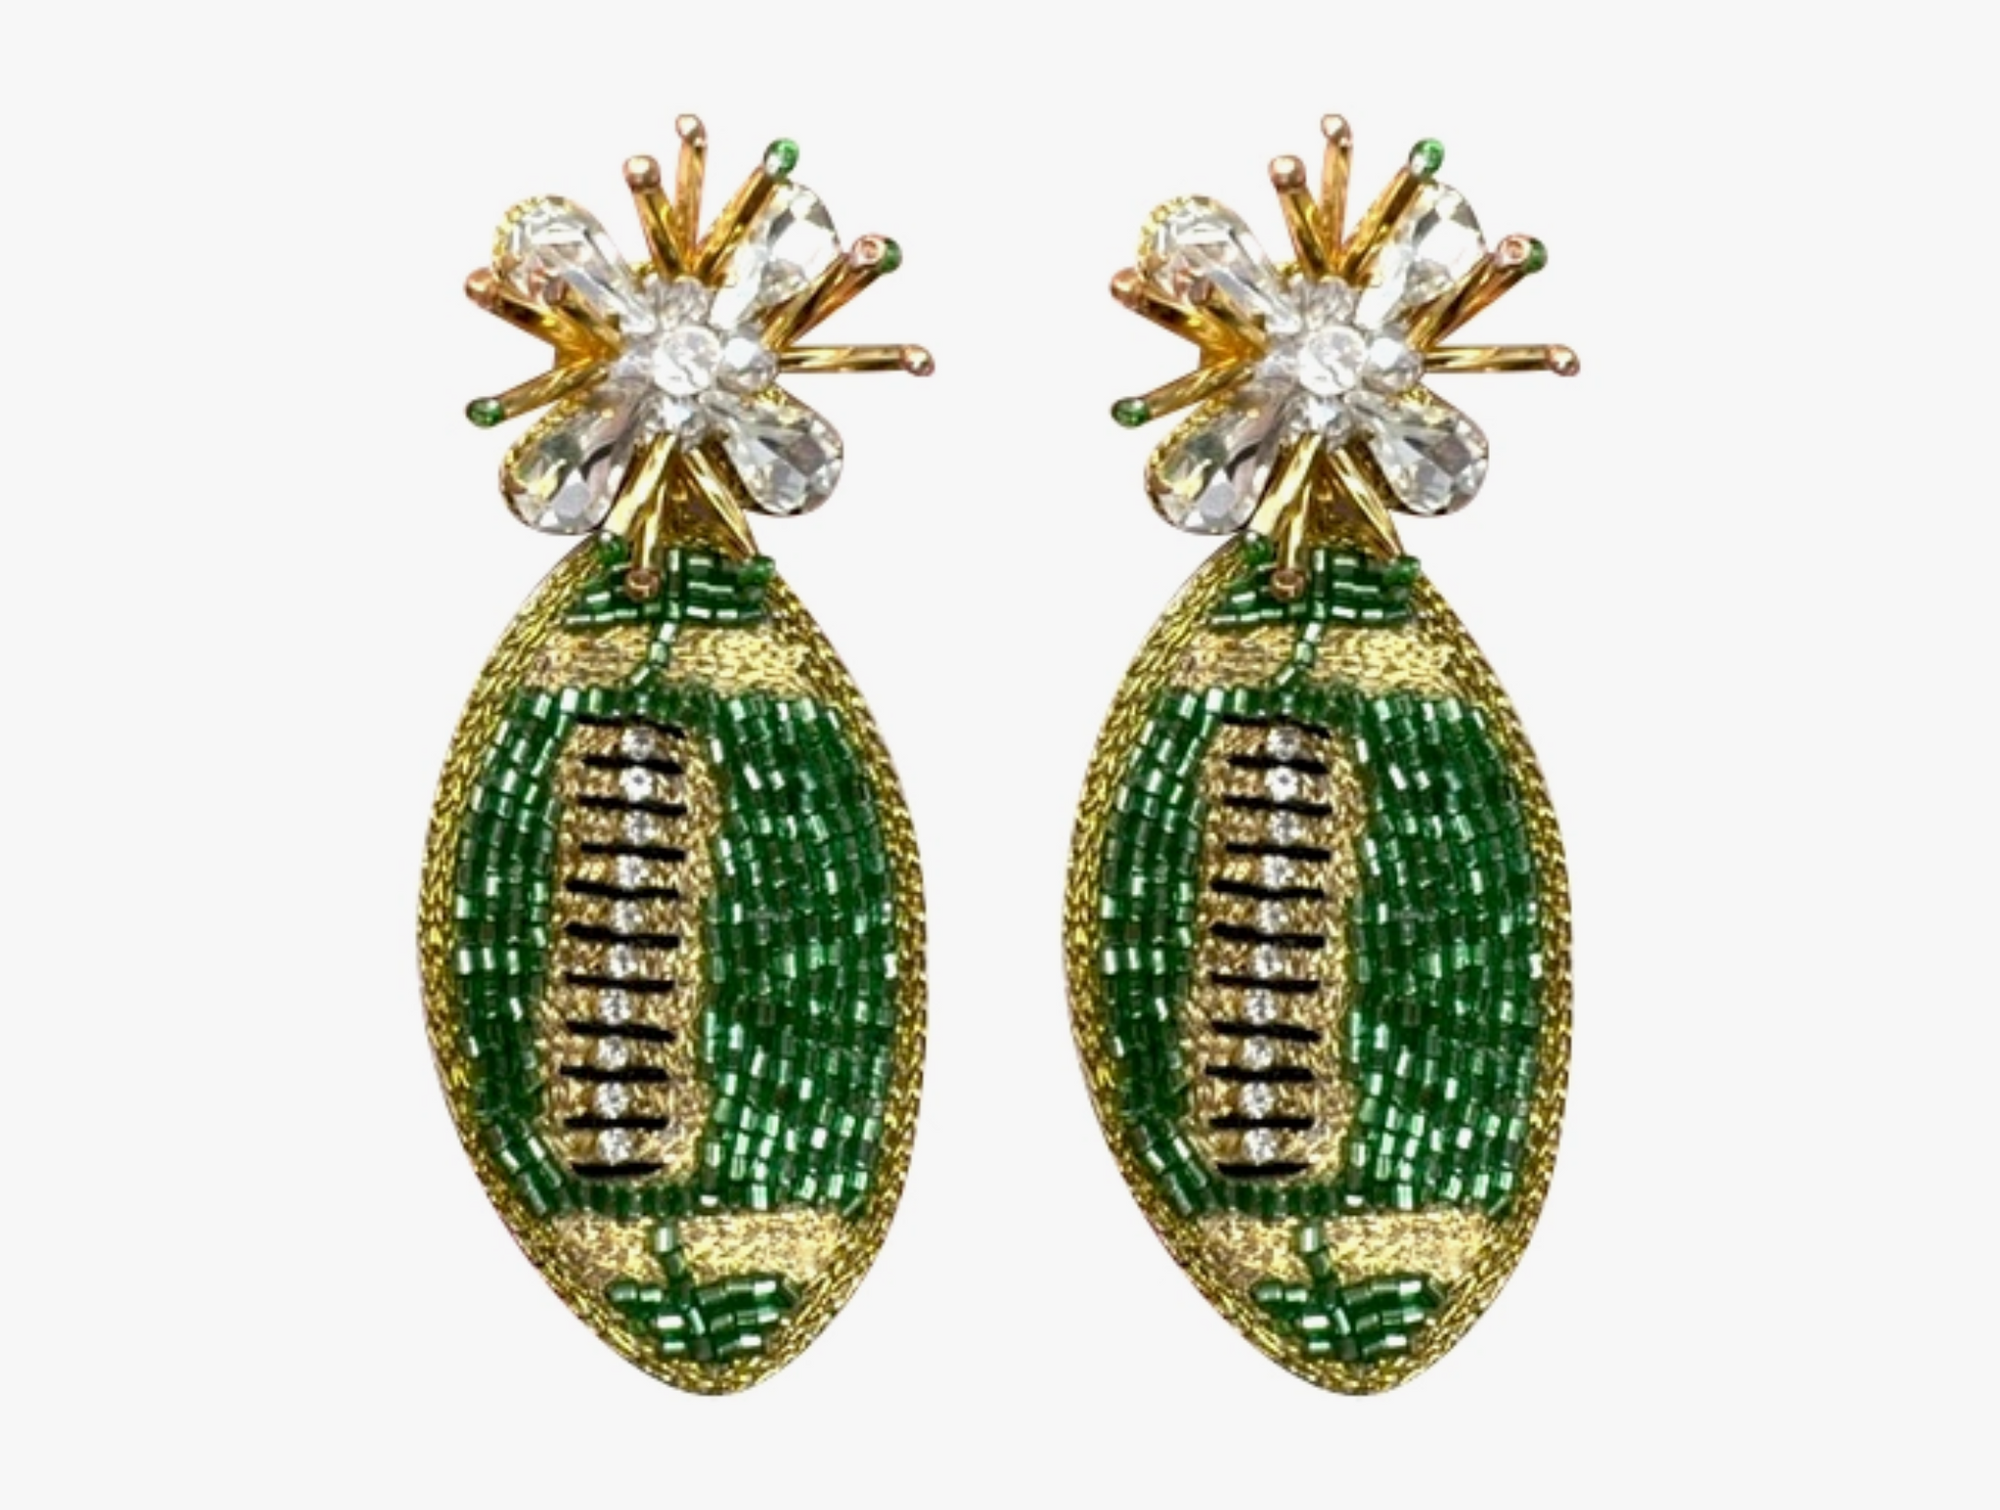 Game Day Football Earrings - Green and Gold